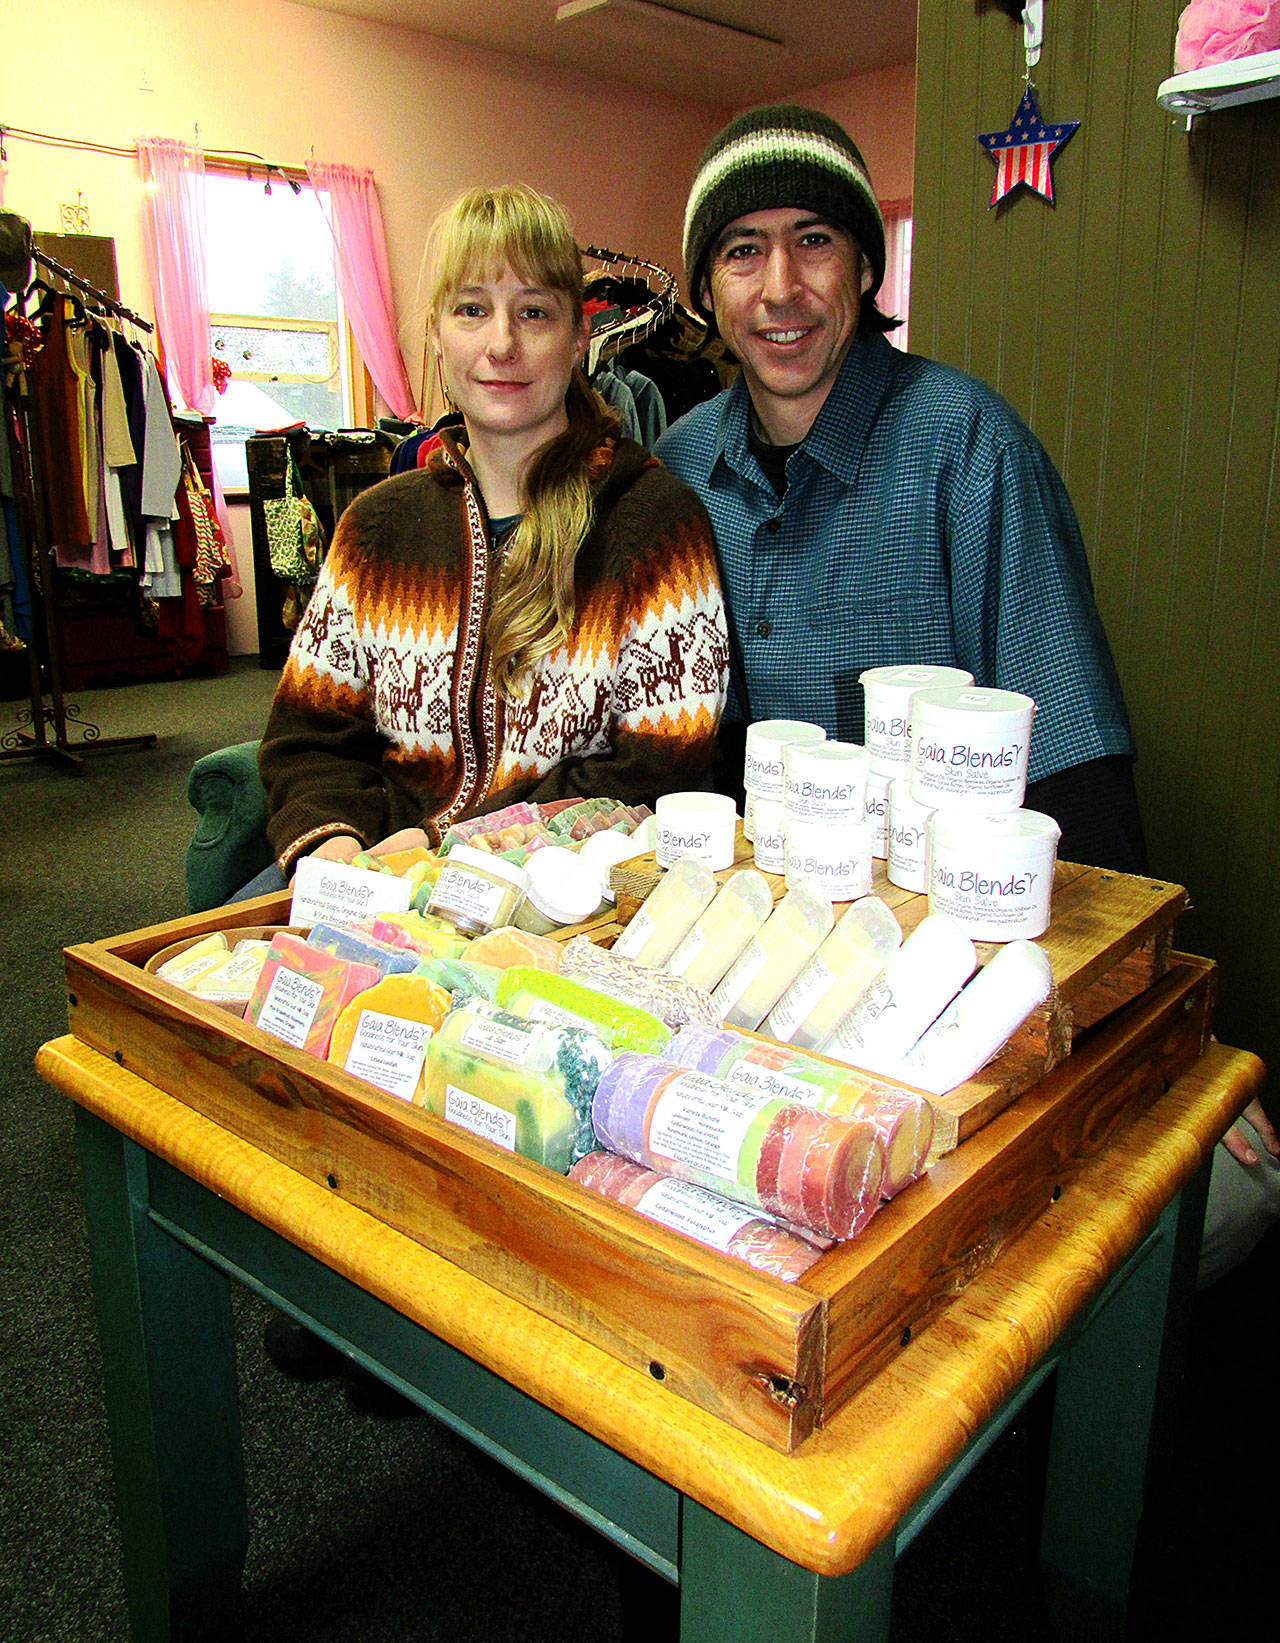 Scott D. Johnston photo: Laura and Ben Brannon make their Gaia Blend organic salves, soaps and other products at their home in Ocean Shores.